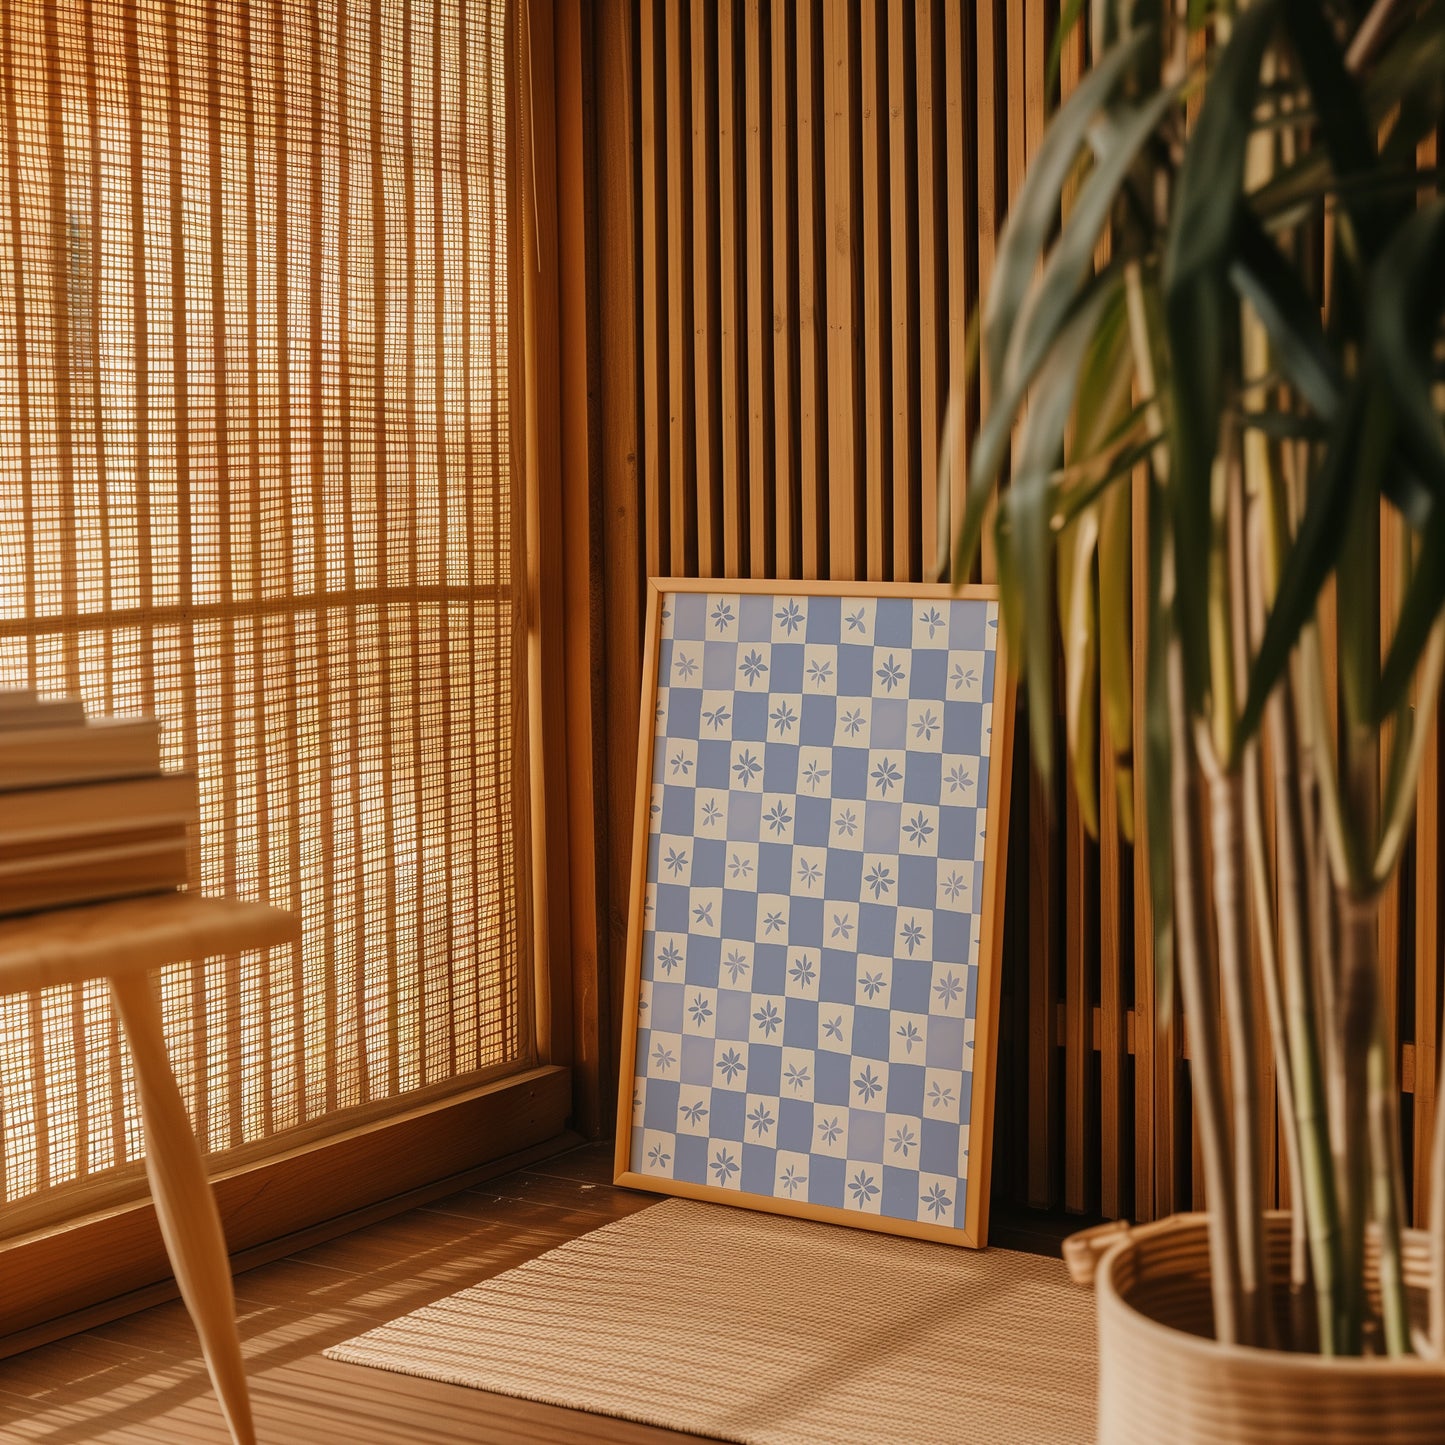 Decorative board with blue patterns leaning against a wall beside a plant in a sunny room with blinds.